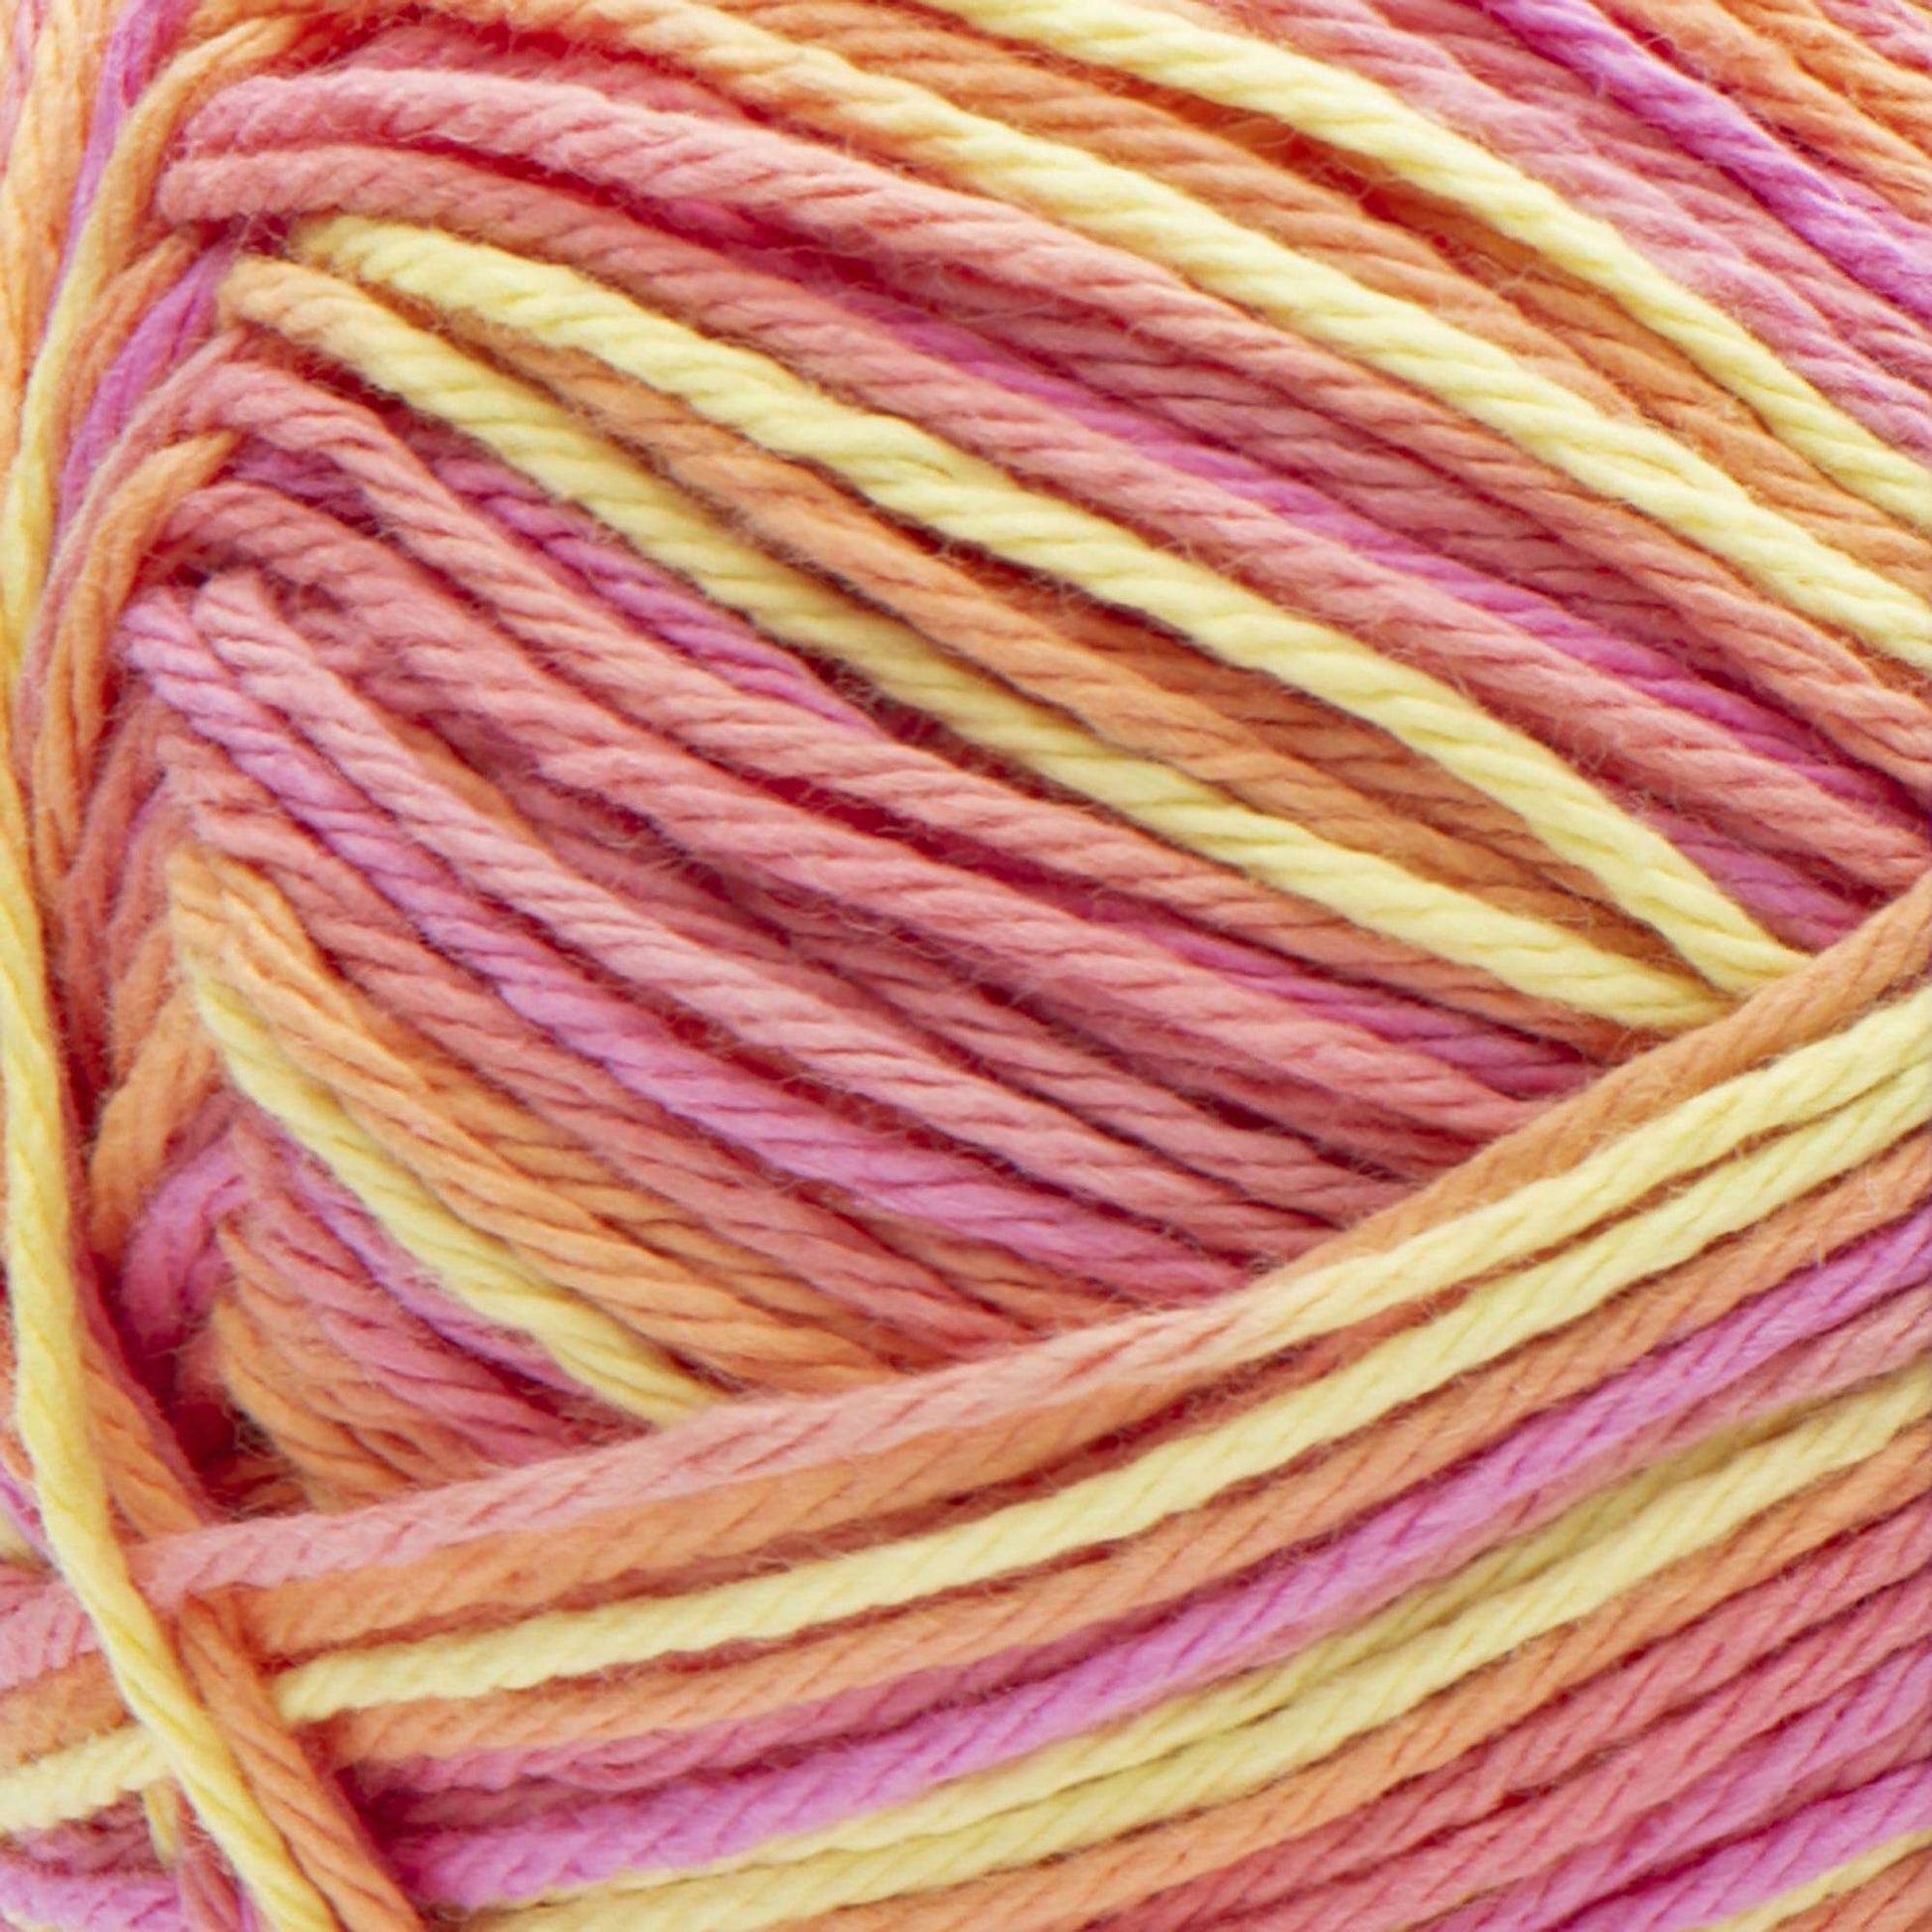 Bernat Handicrafter Cotton Yarn - Ombres-Sunkissed Ombre, 1 count - Kroger